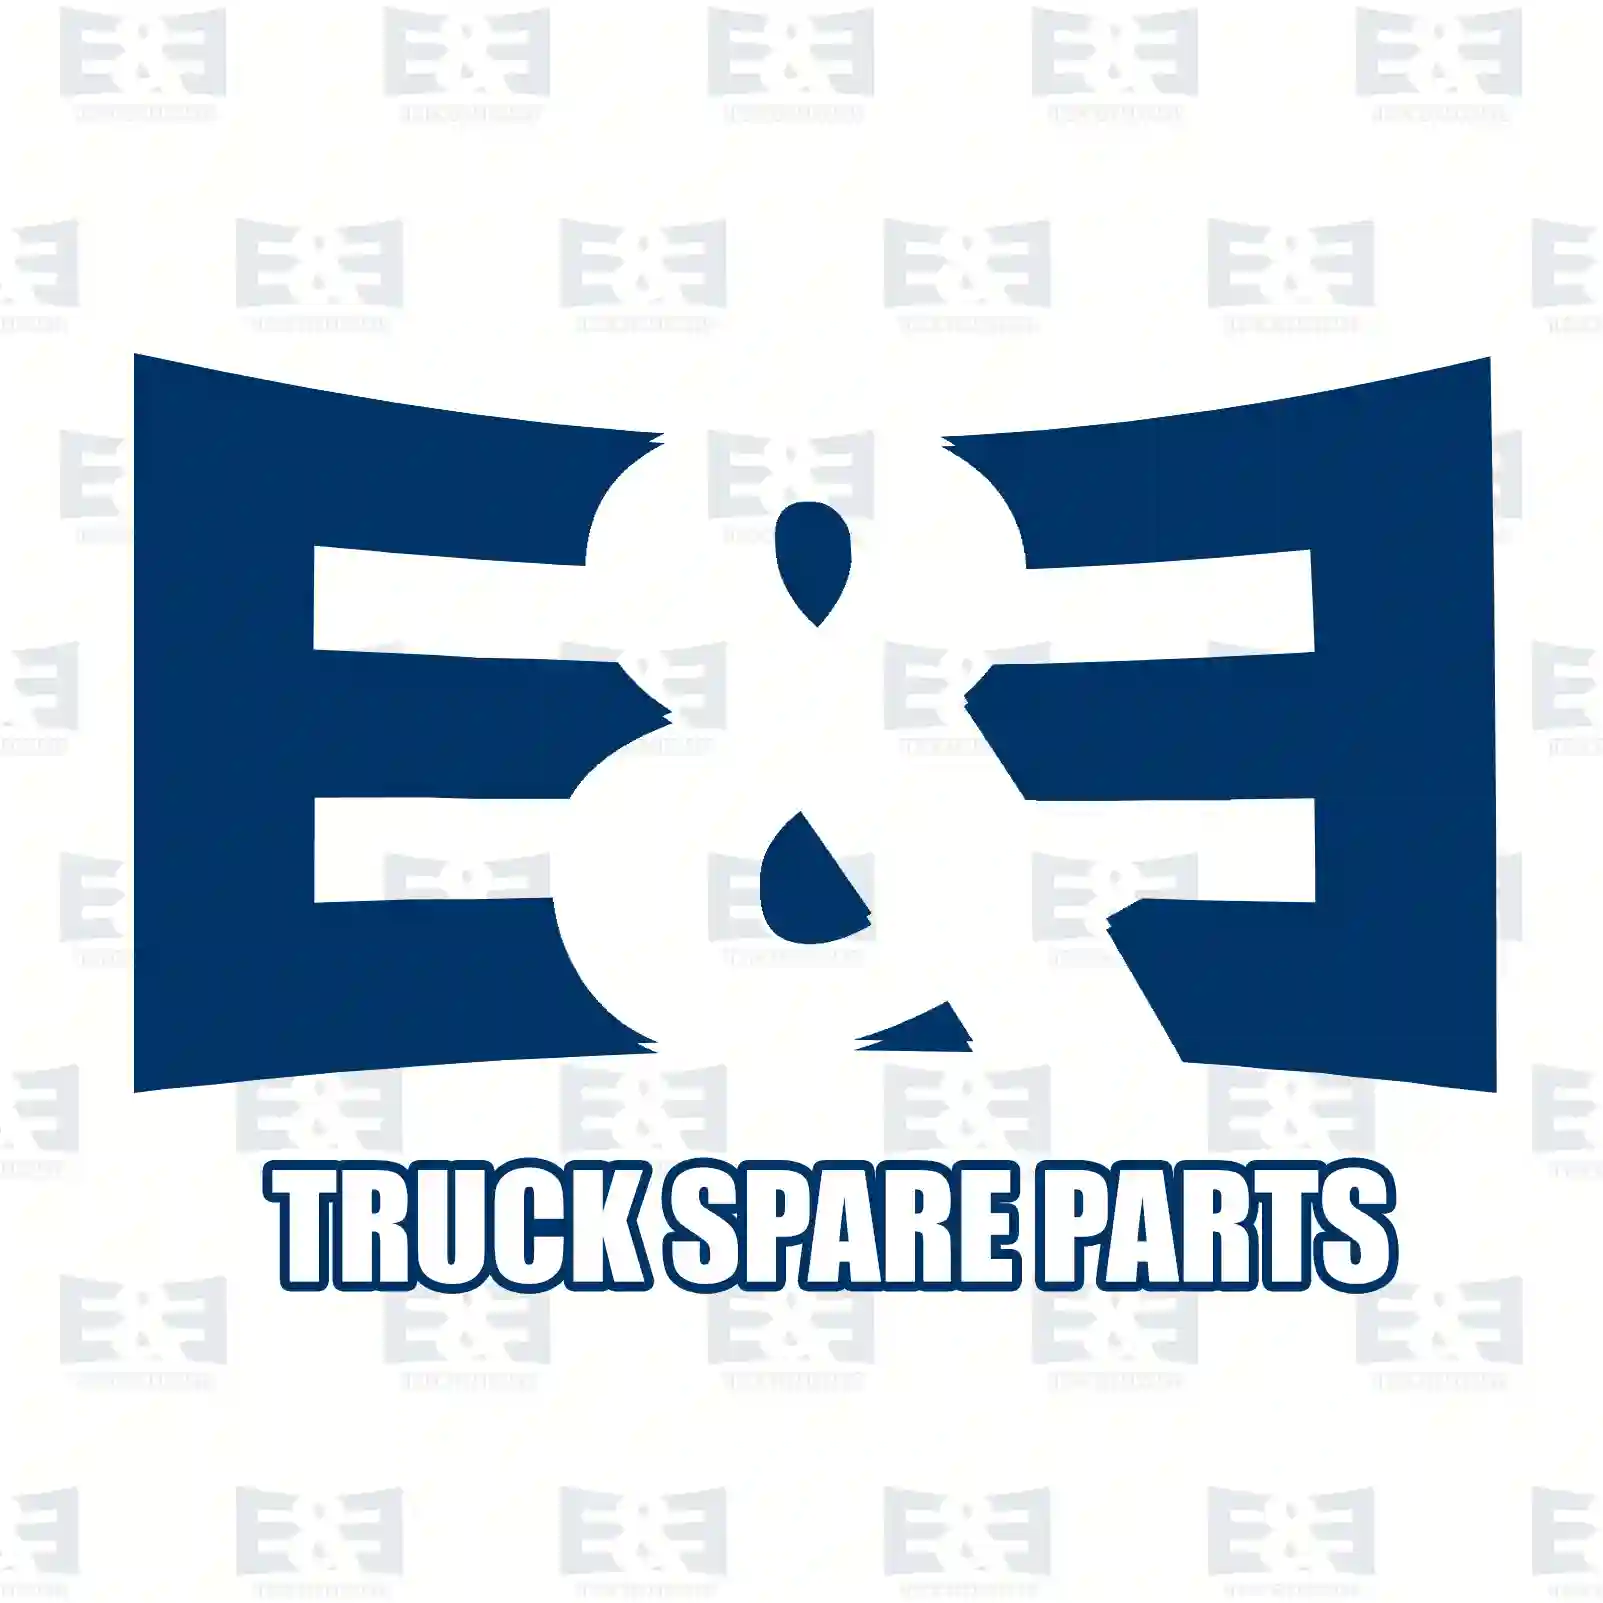  General overhaul kit, complete with race rings || E&E Truck Spare Parts | Truck Spare Parts, Auotomotive Spare Parts